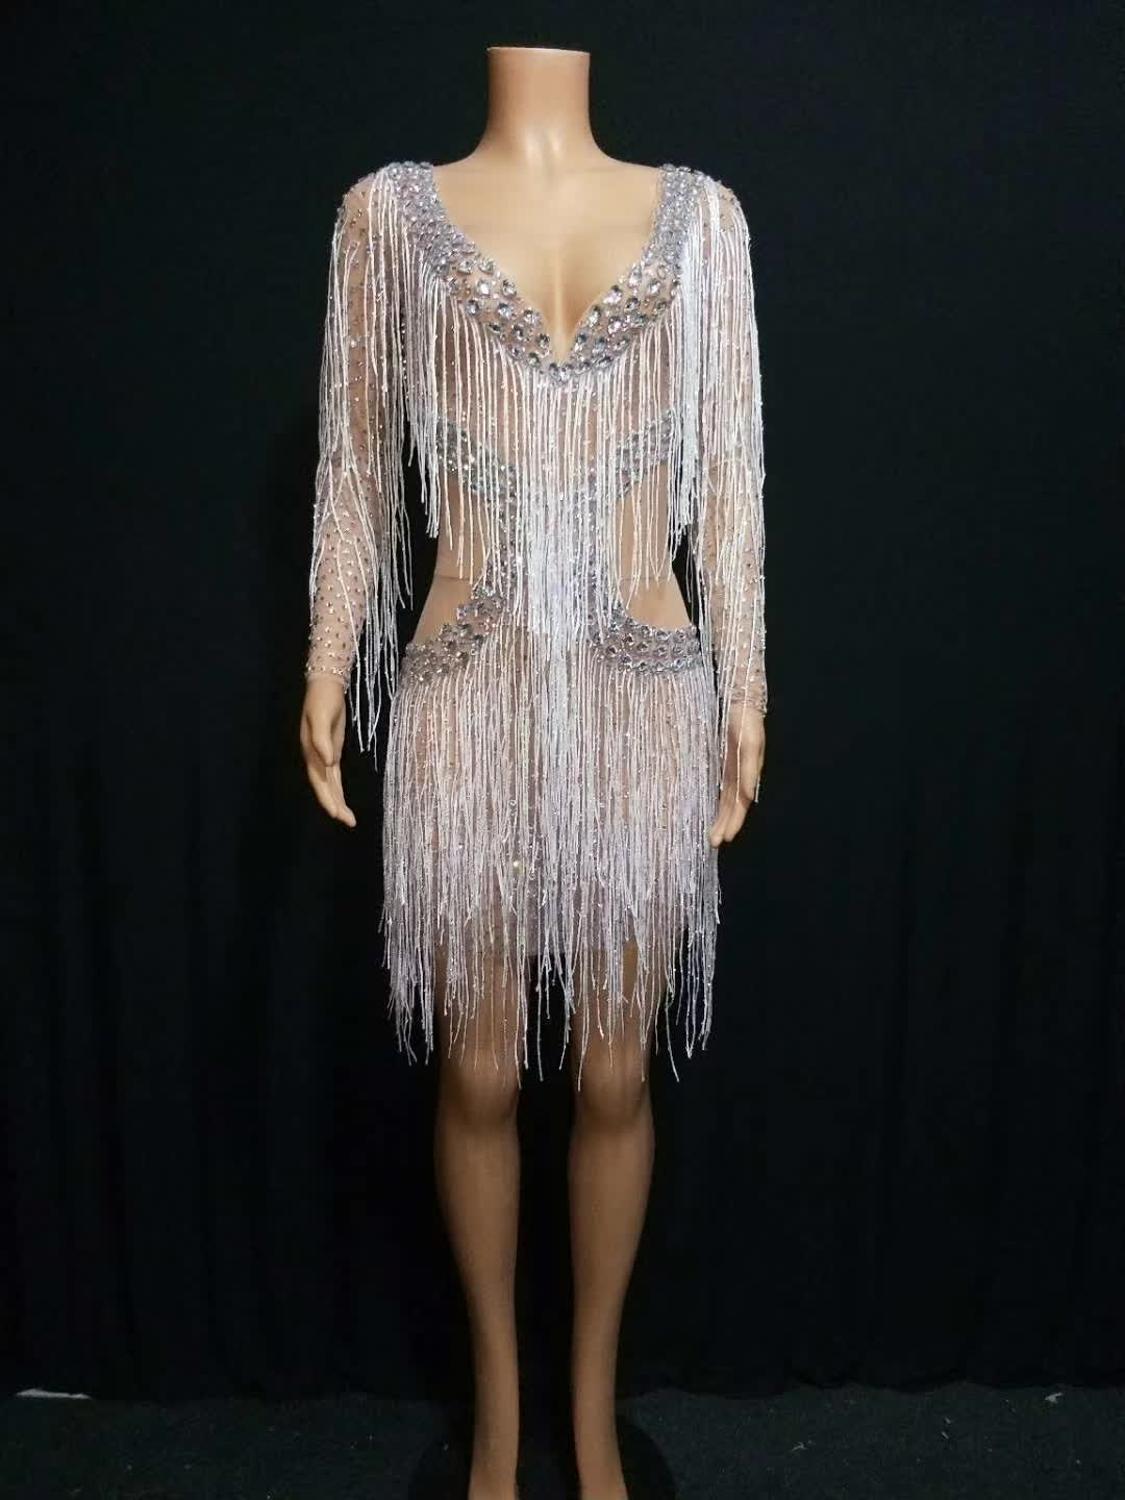 Sparkly Crystals Sequined Dress Fashion Closet Clothing